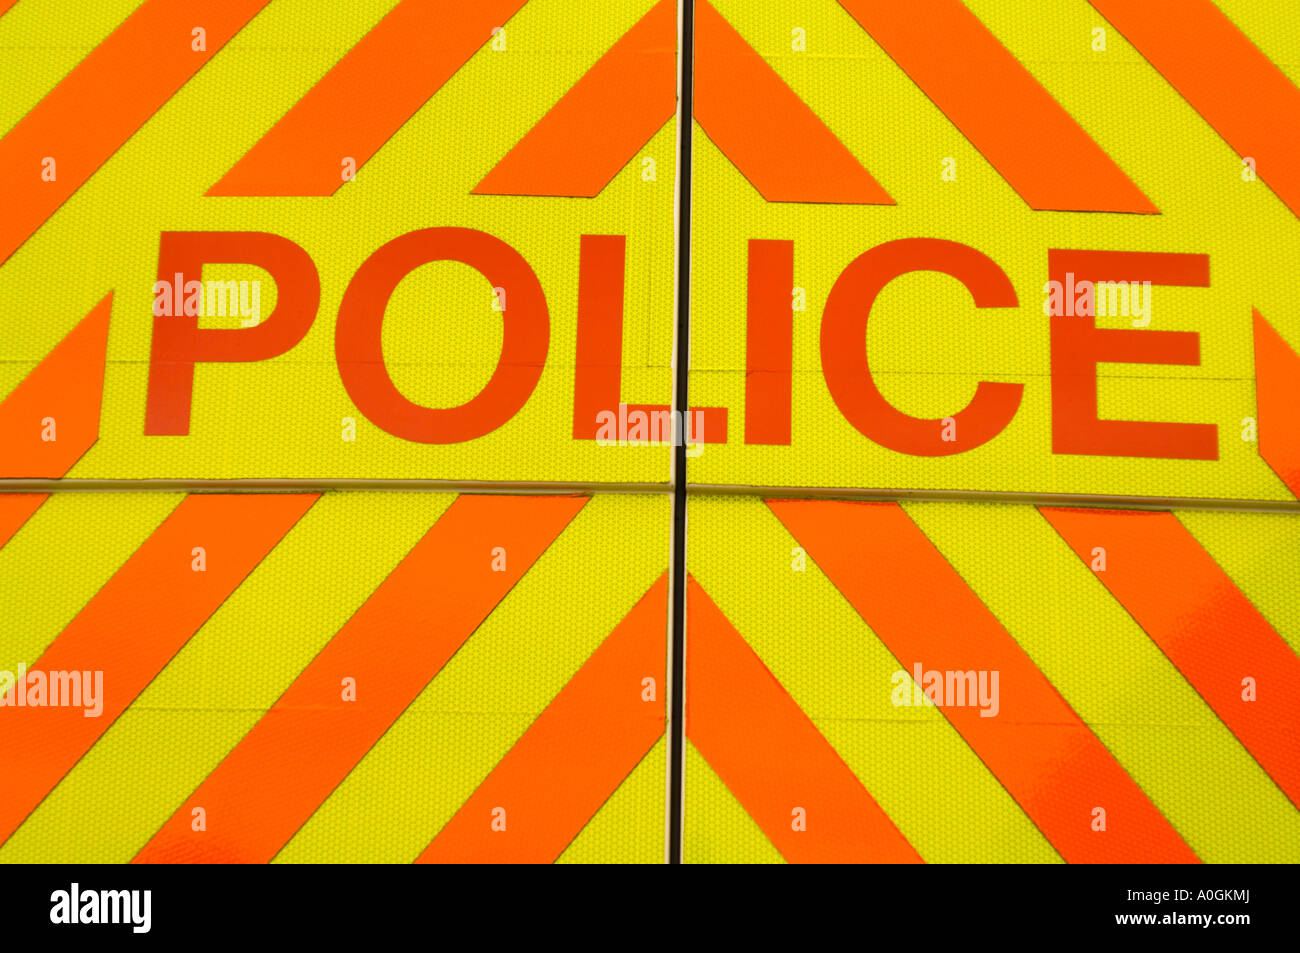 Police sign at the back of vehicle red lettering yellow background England, UK, Europe Stock Photo